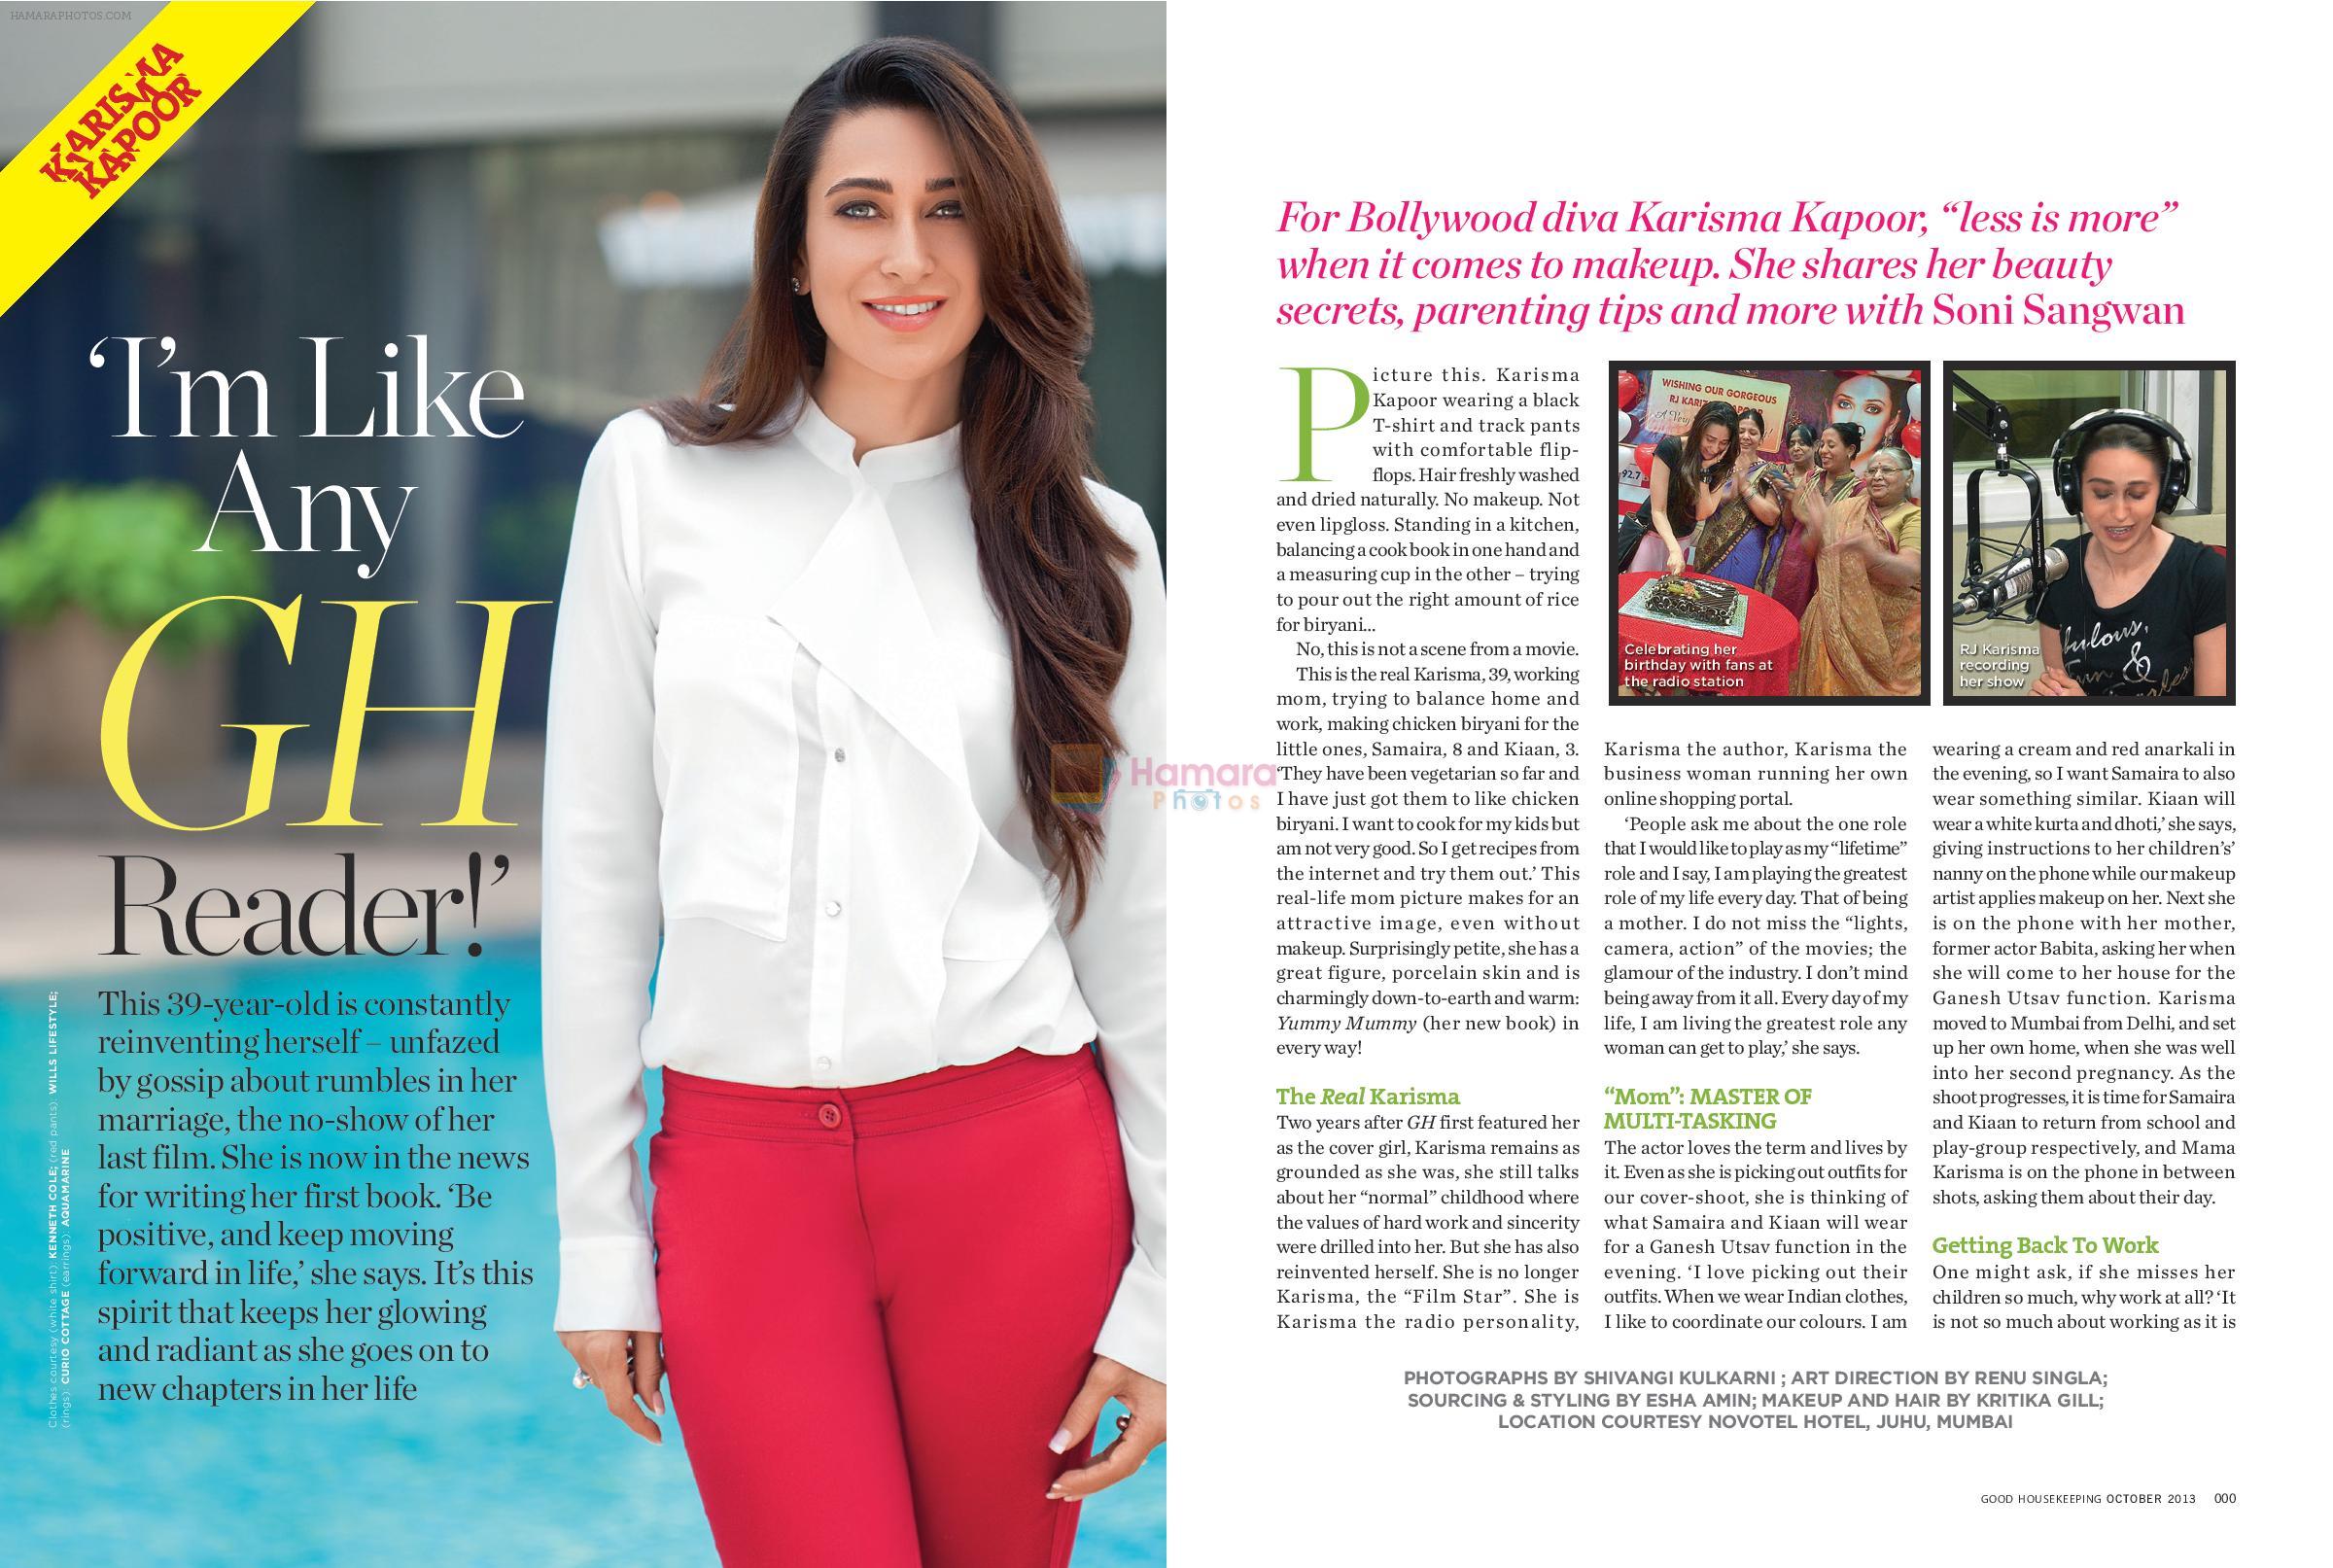 Karisma Kapoor on the cover of Good Housekeeping magazine's Oct. 2013 issue